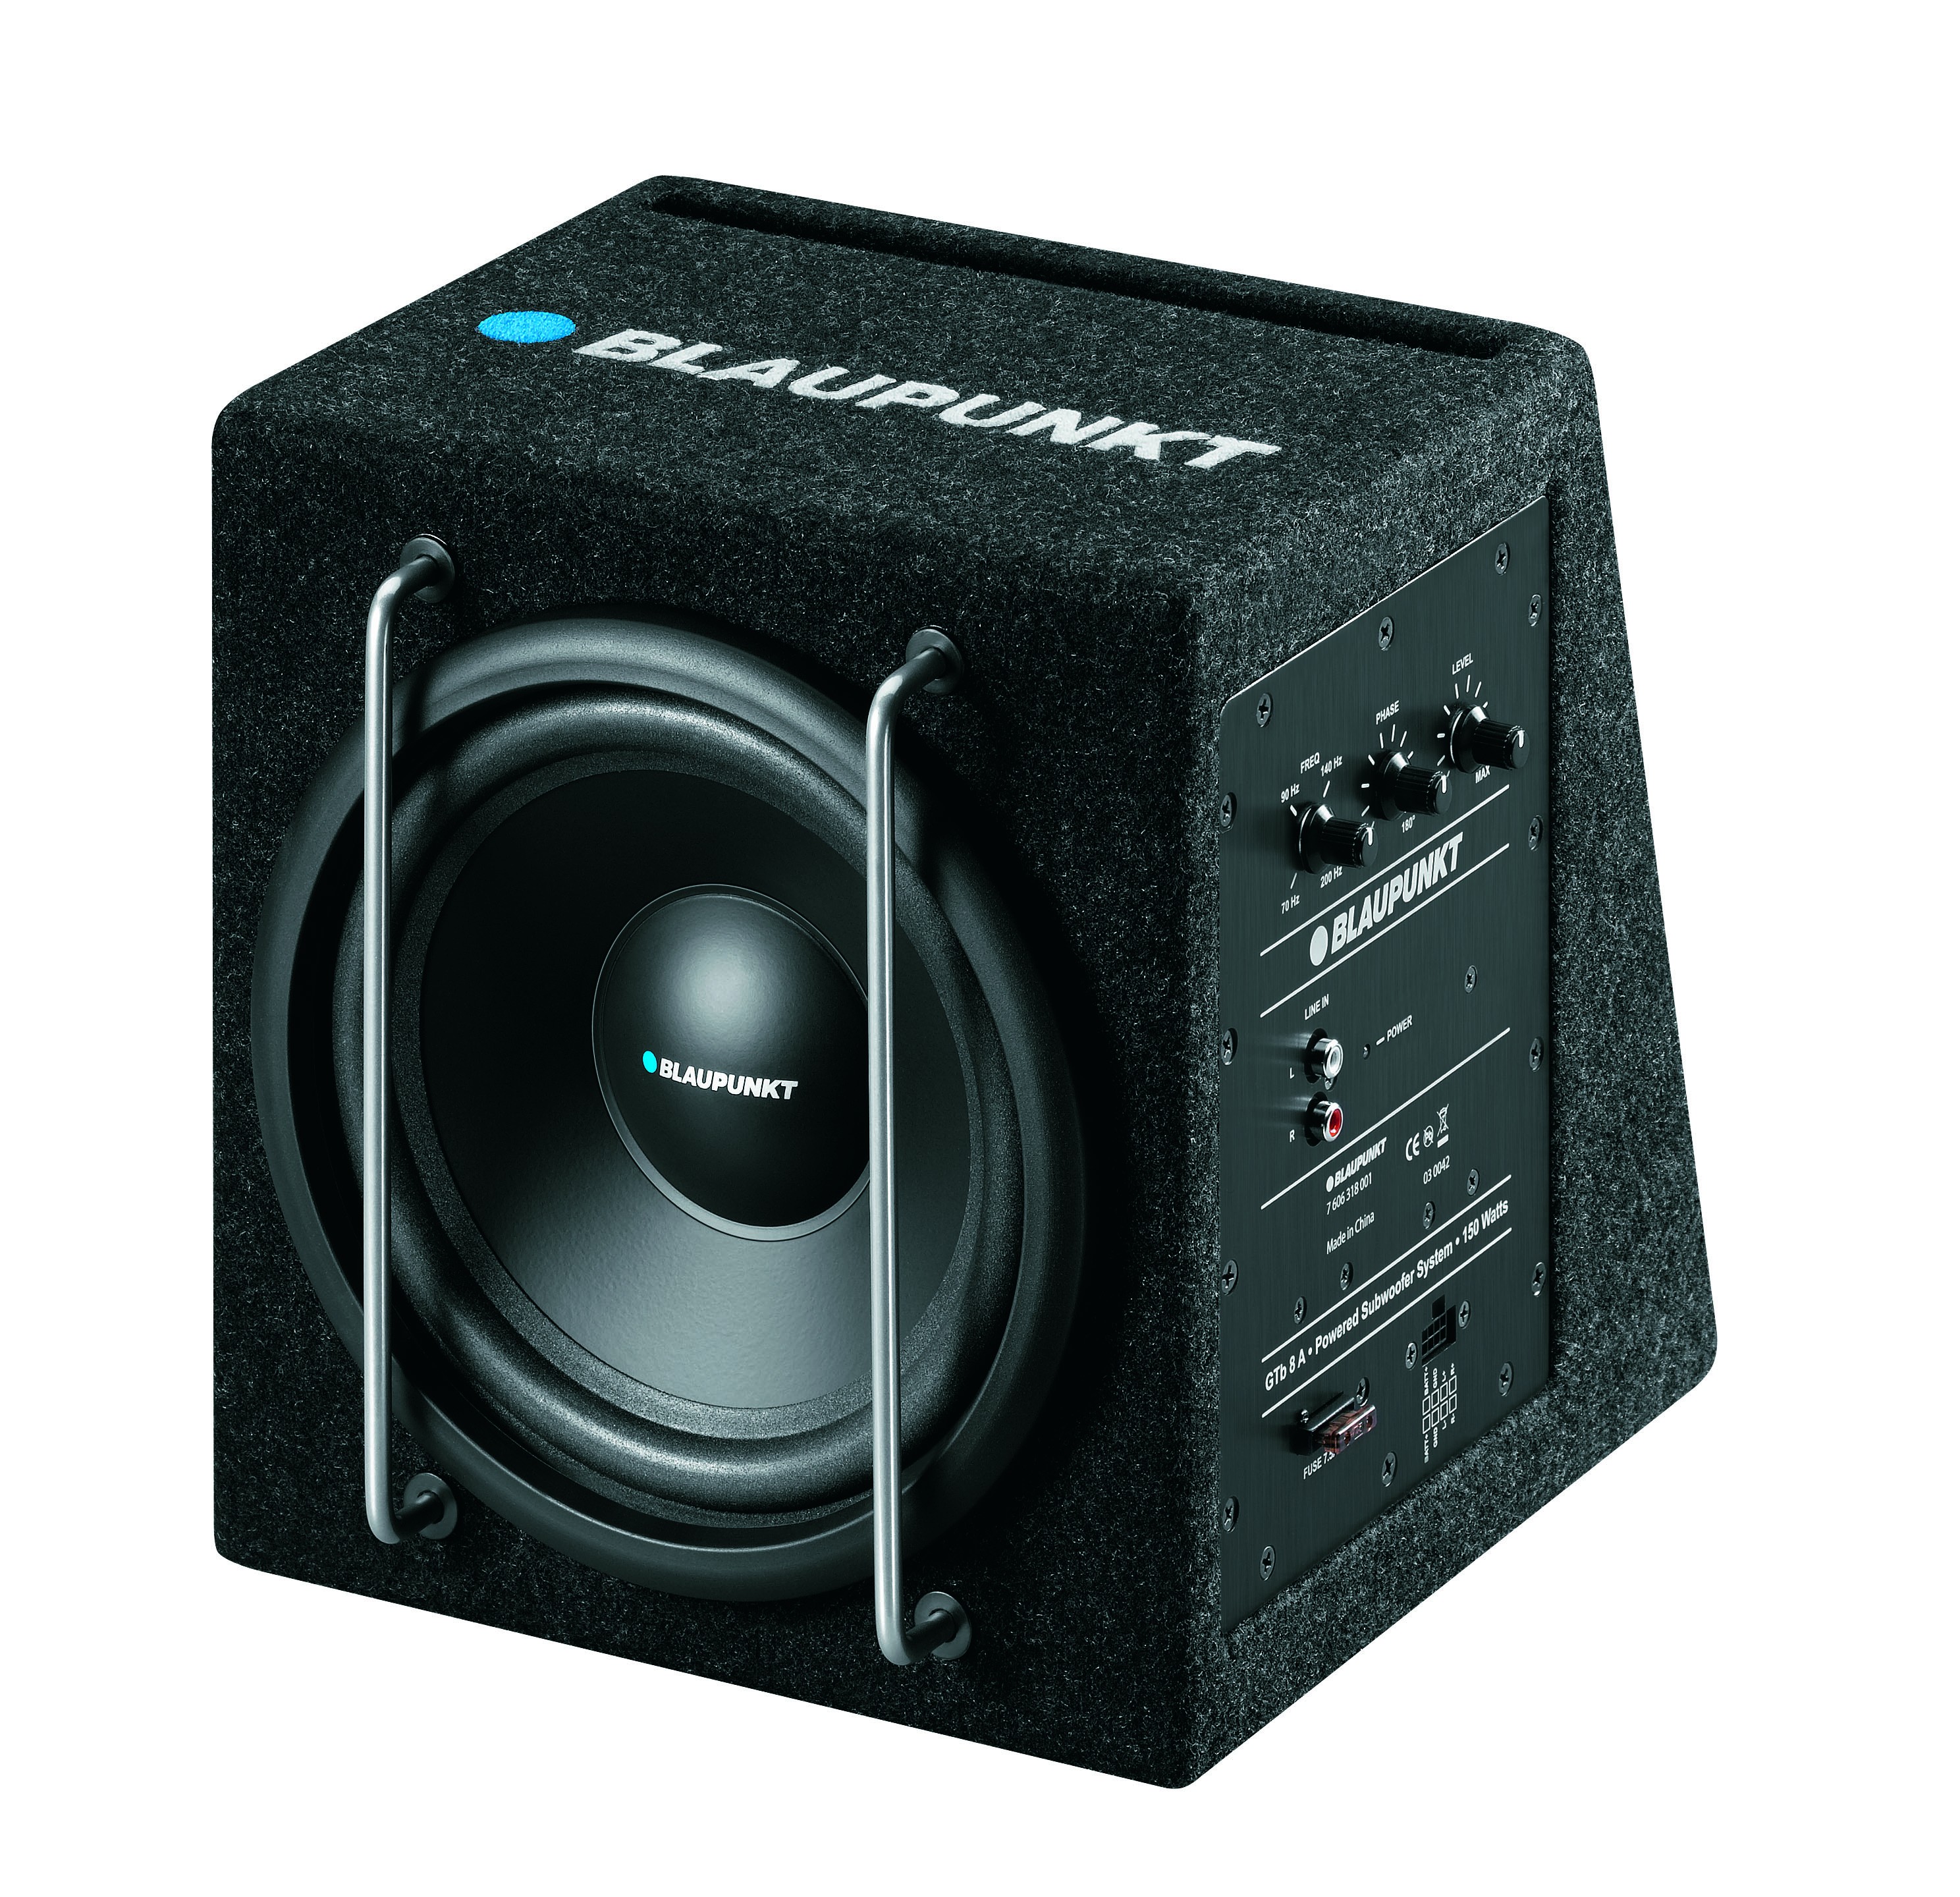 Blaupunkt launches GTb 8A all-in-one subwoofer at Rs 9,990